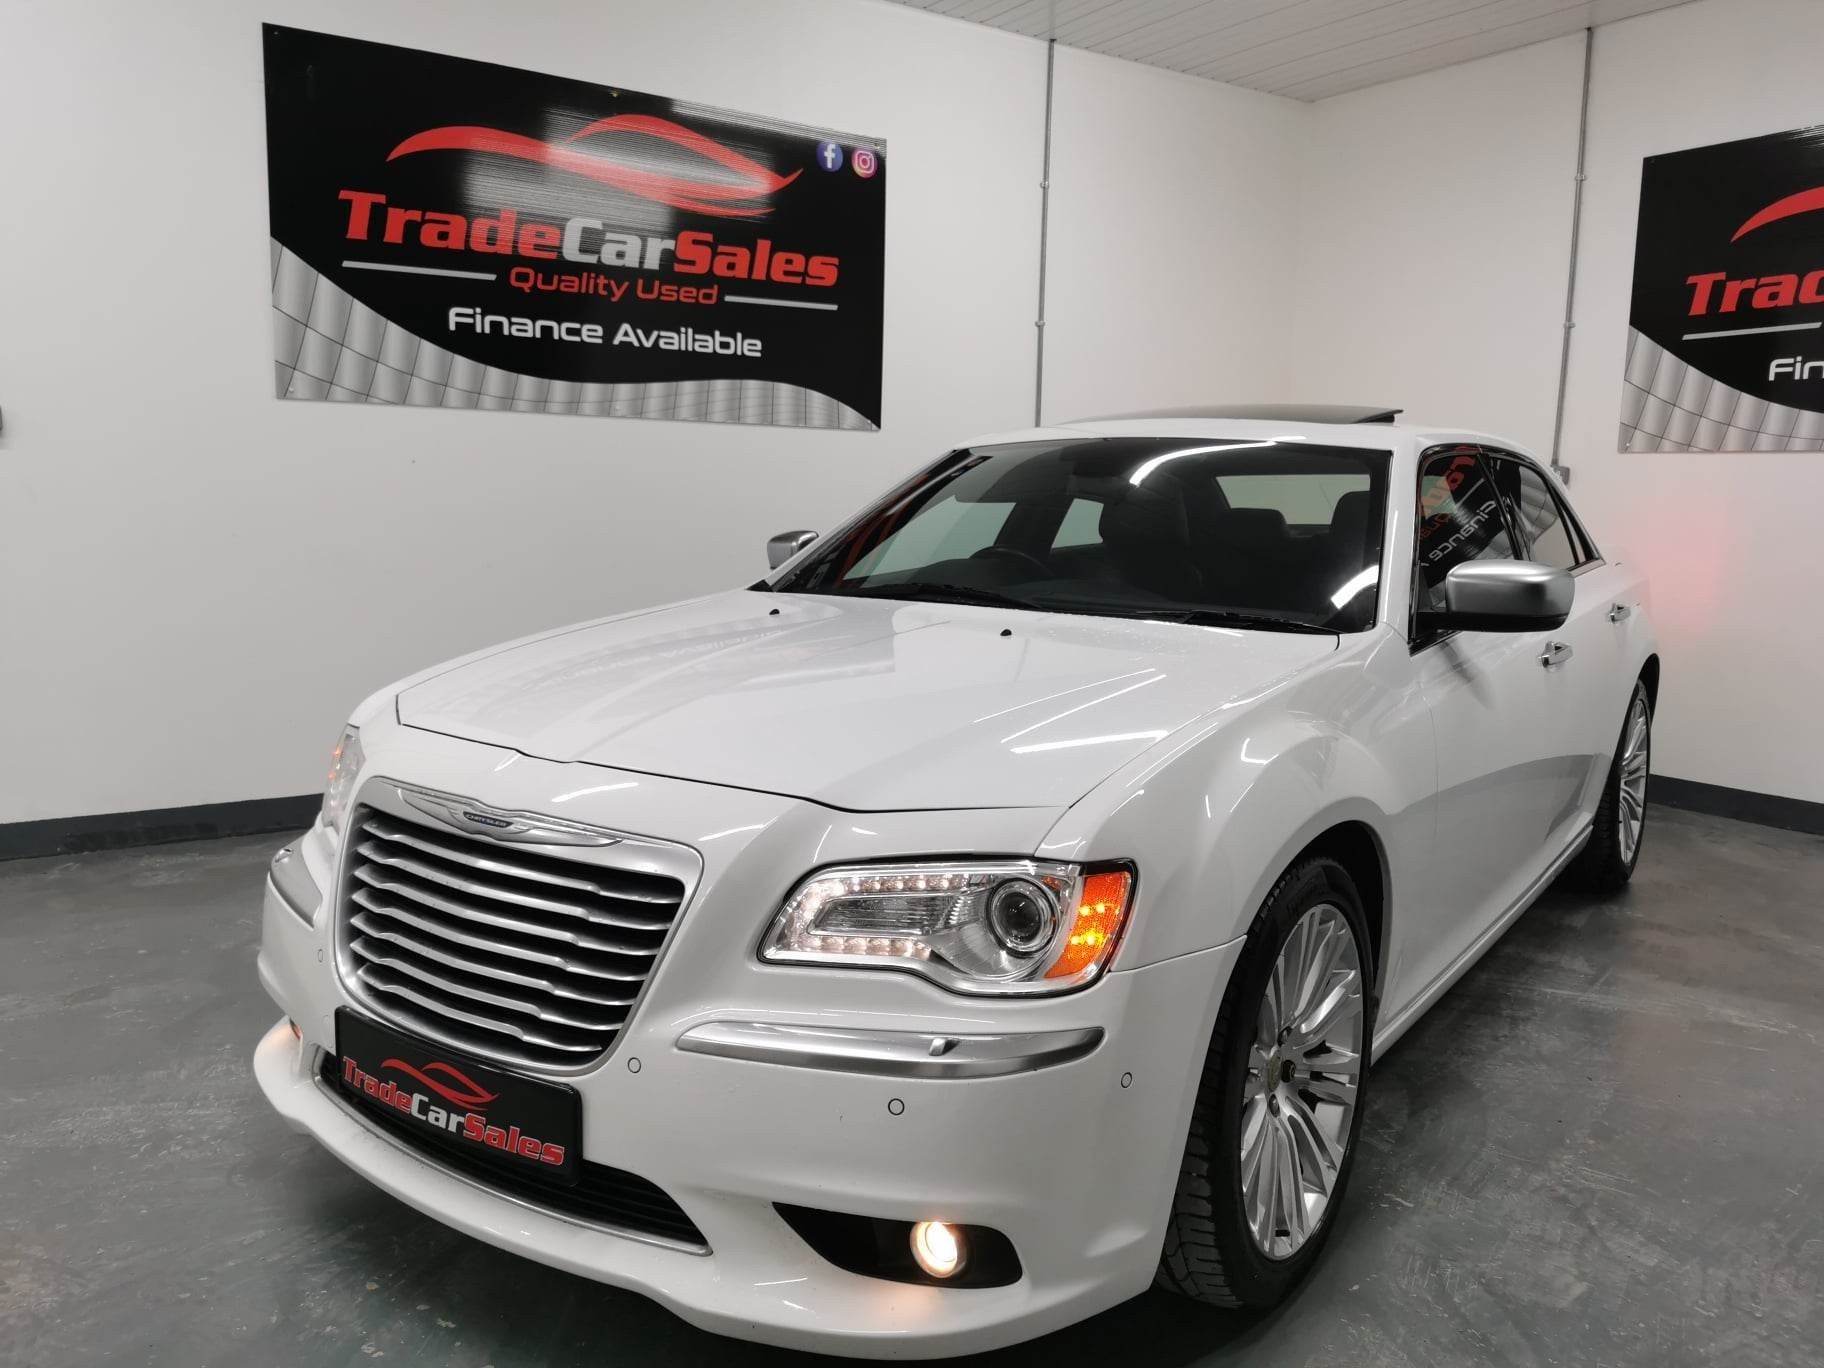 Used 2013 Chrysler 300C CRD EXECUTIVE 4-Door for sale in